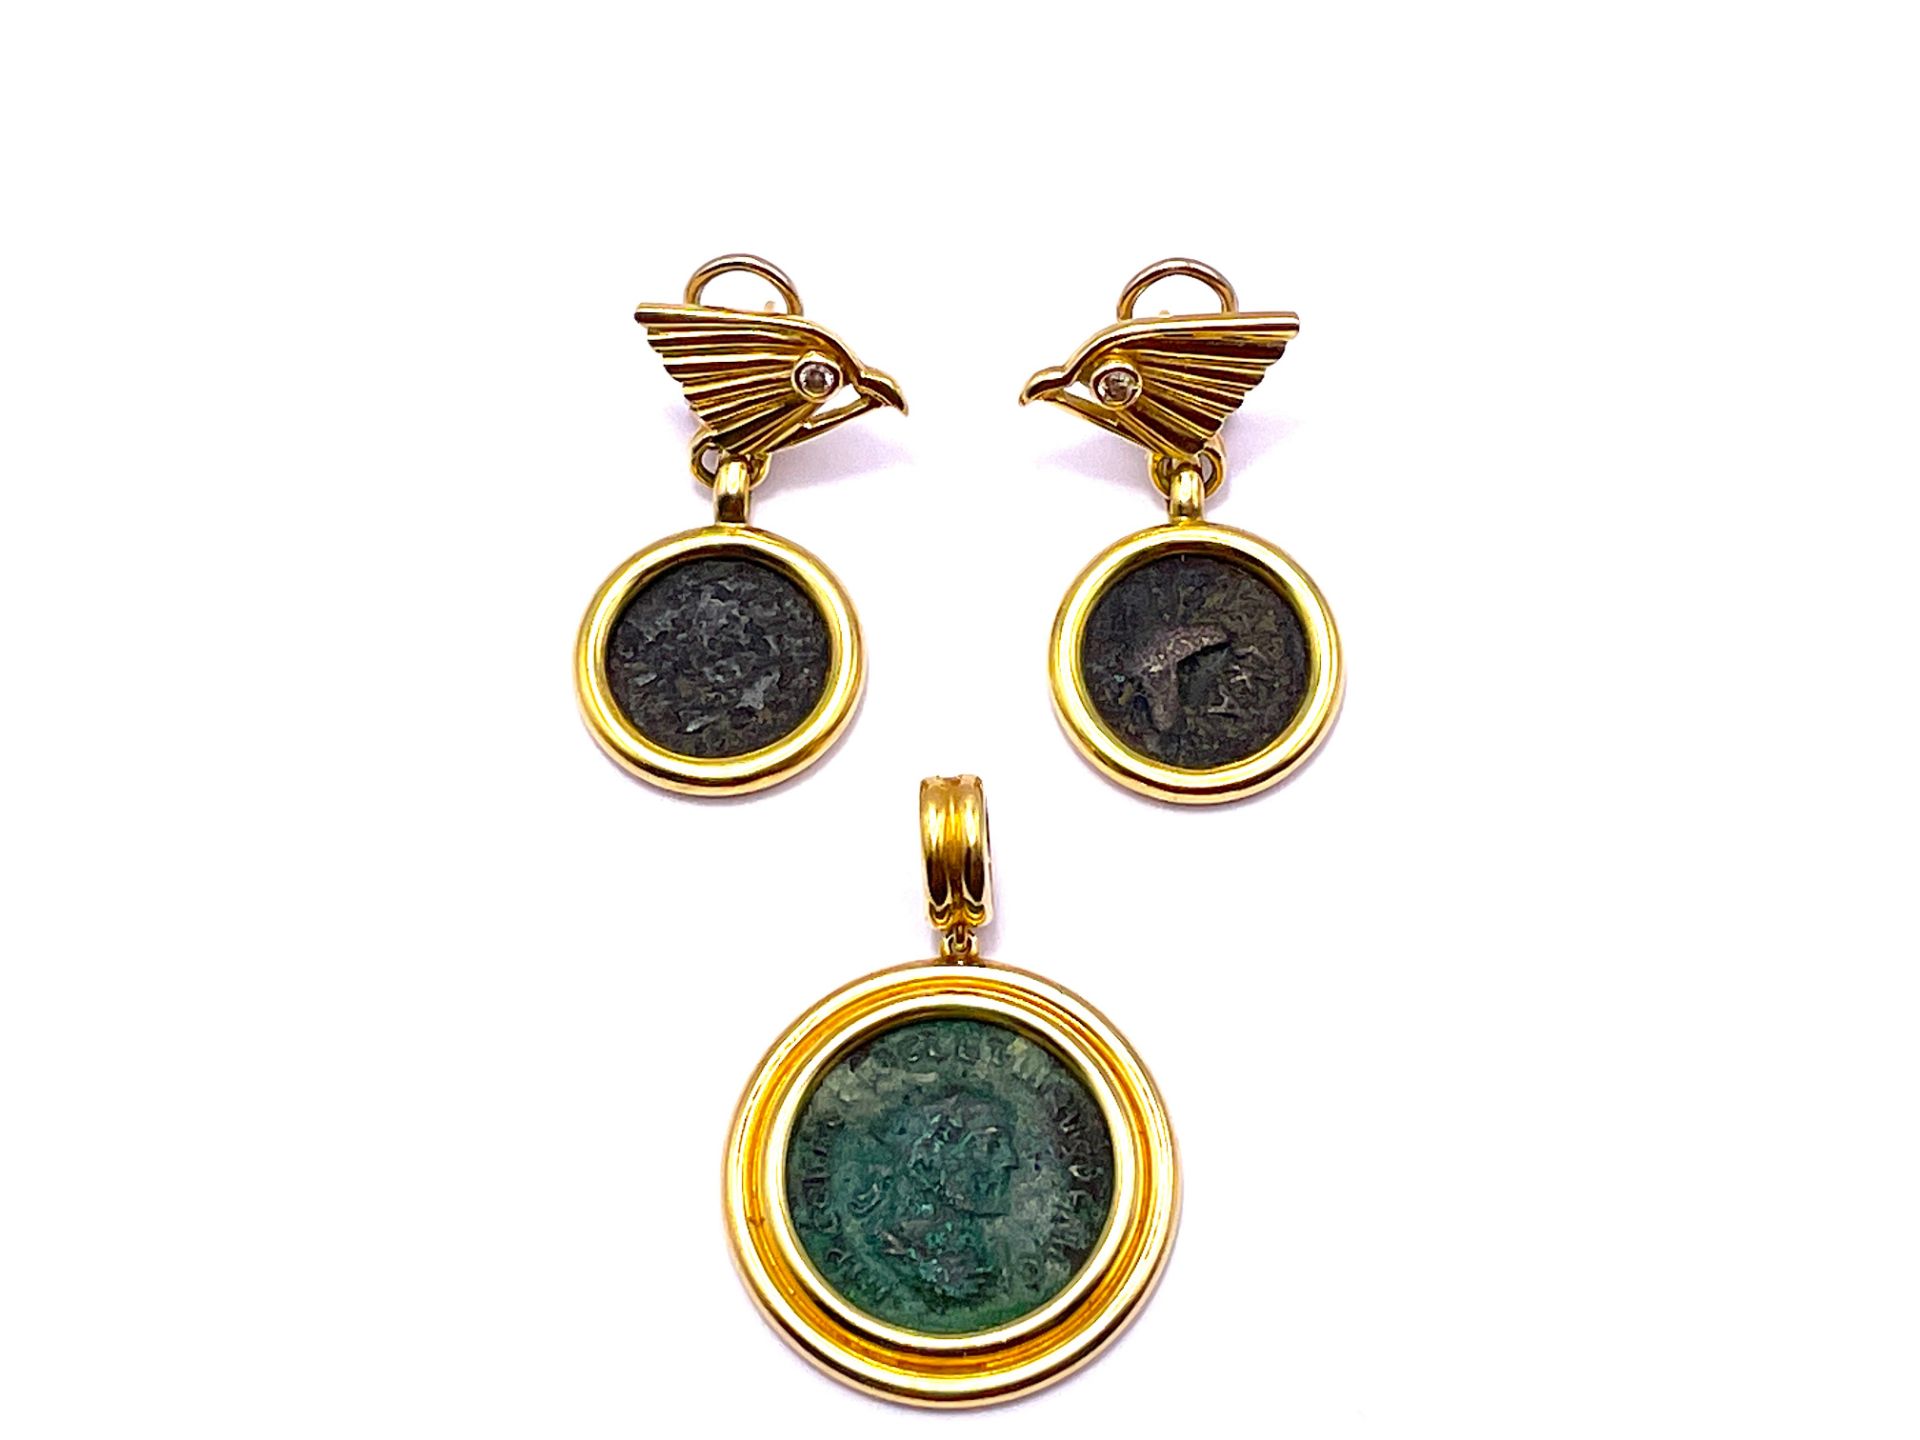 Set of ear stud clips and pendant with antique coins - Image 9 of 9